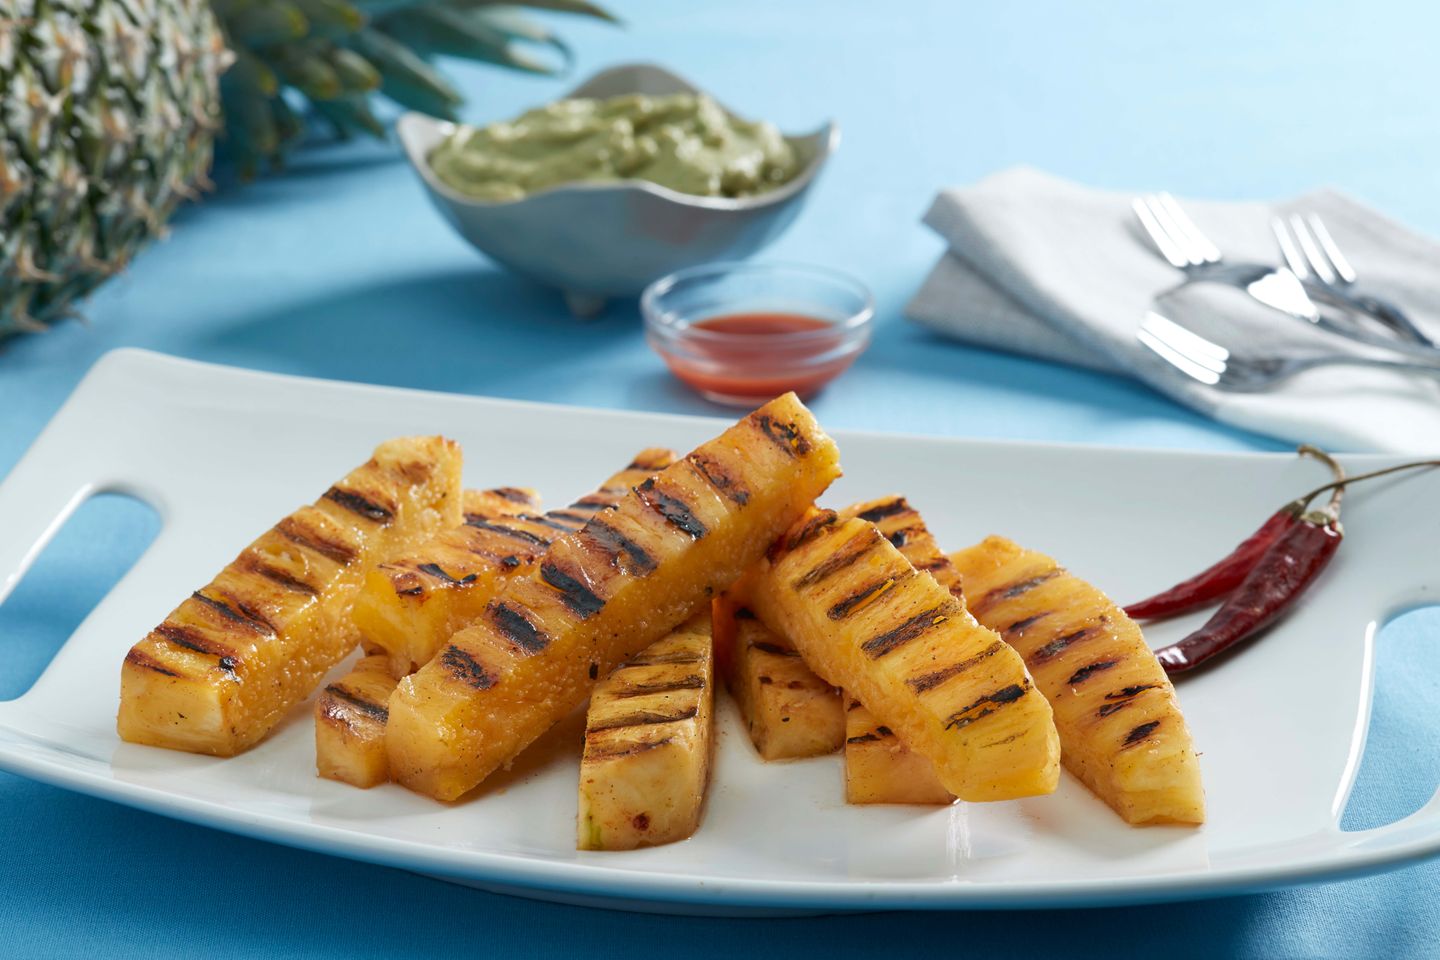 Grilled Pineapple Fries with Avocado-Sriracha Dip